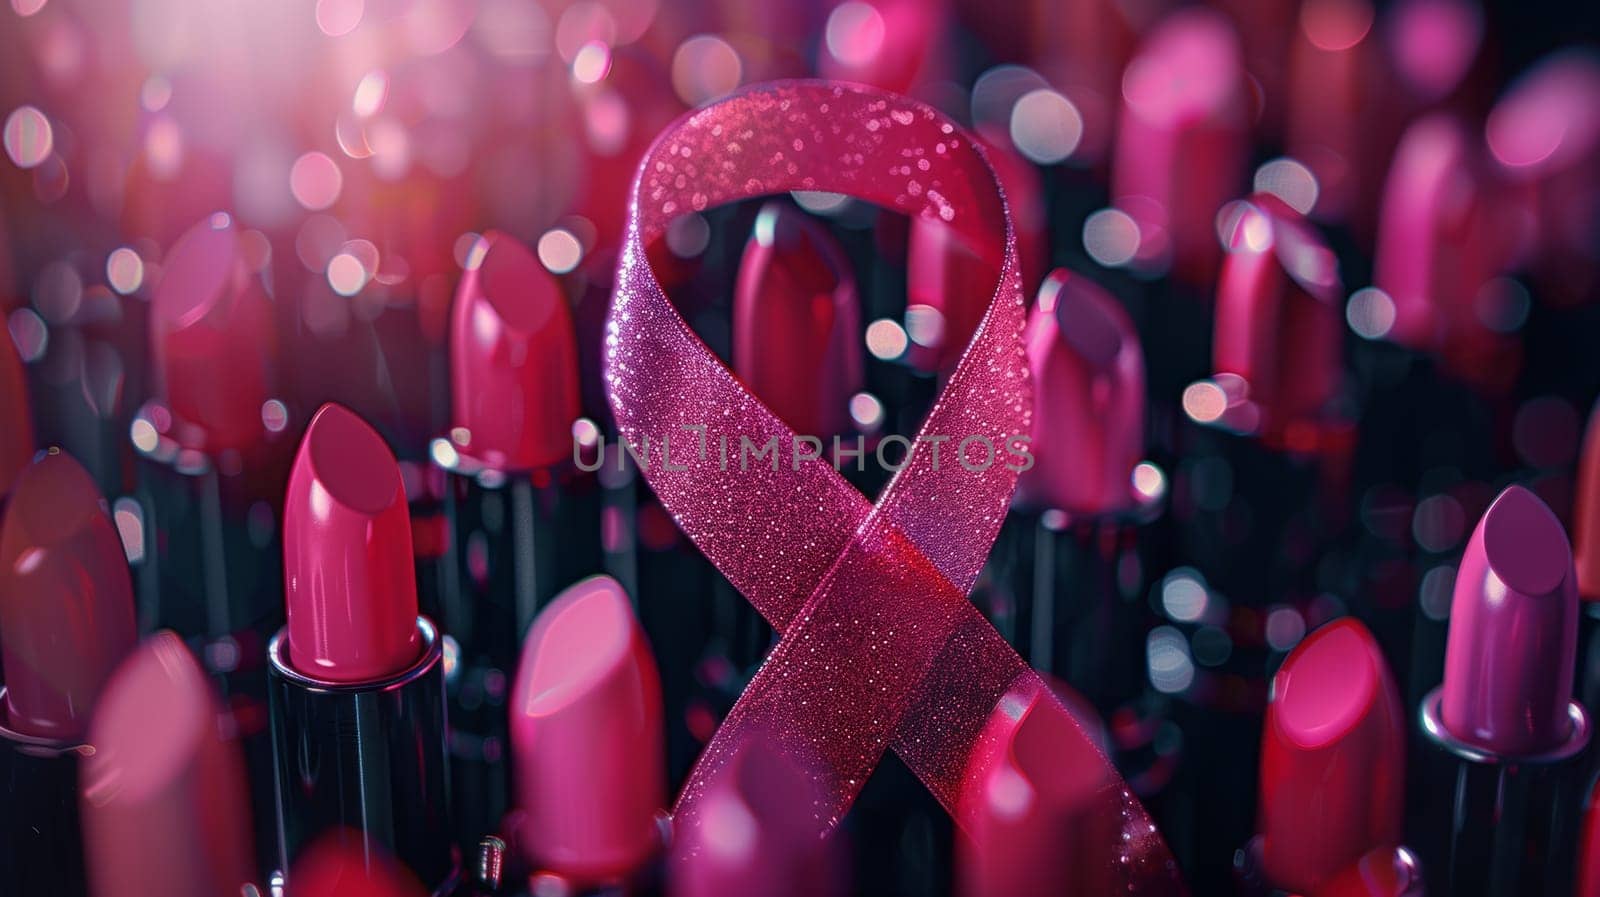 Pink lipstick ribbons symbolizing breast cancer awareness surrounded by bokeh lights by ailike